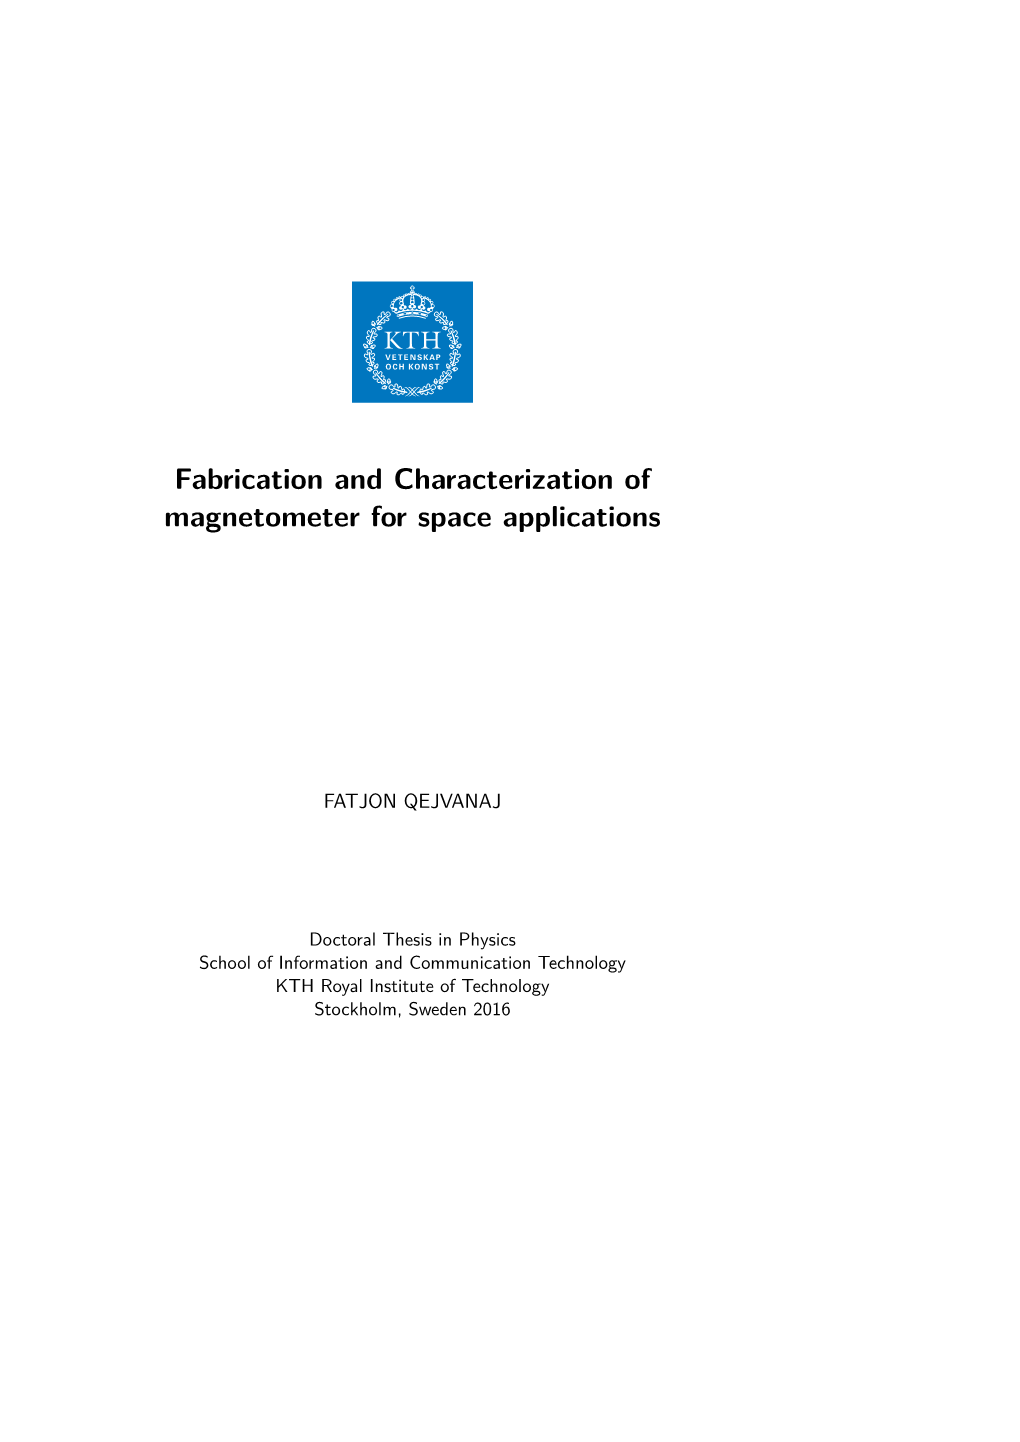 Fabrication and Characterization of Magnetometer for Space Applications